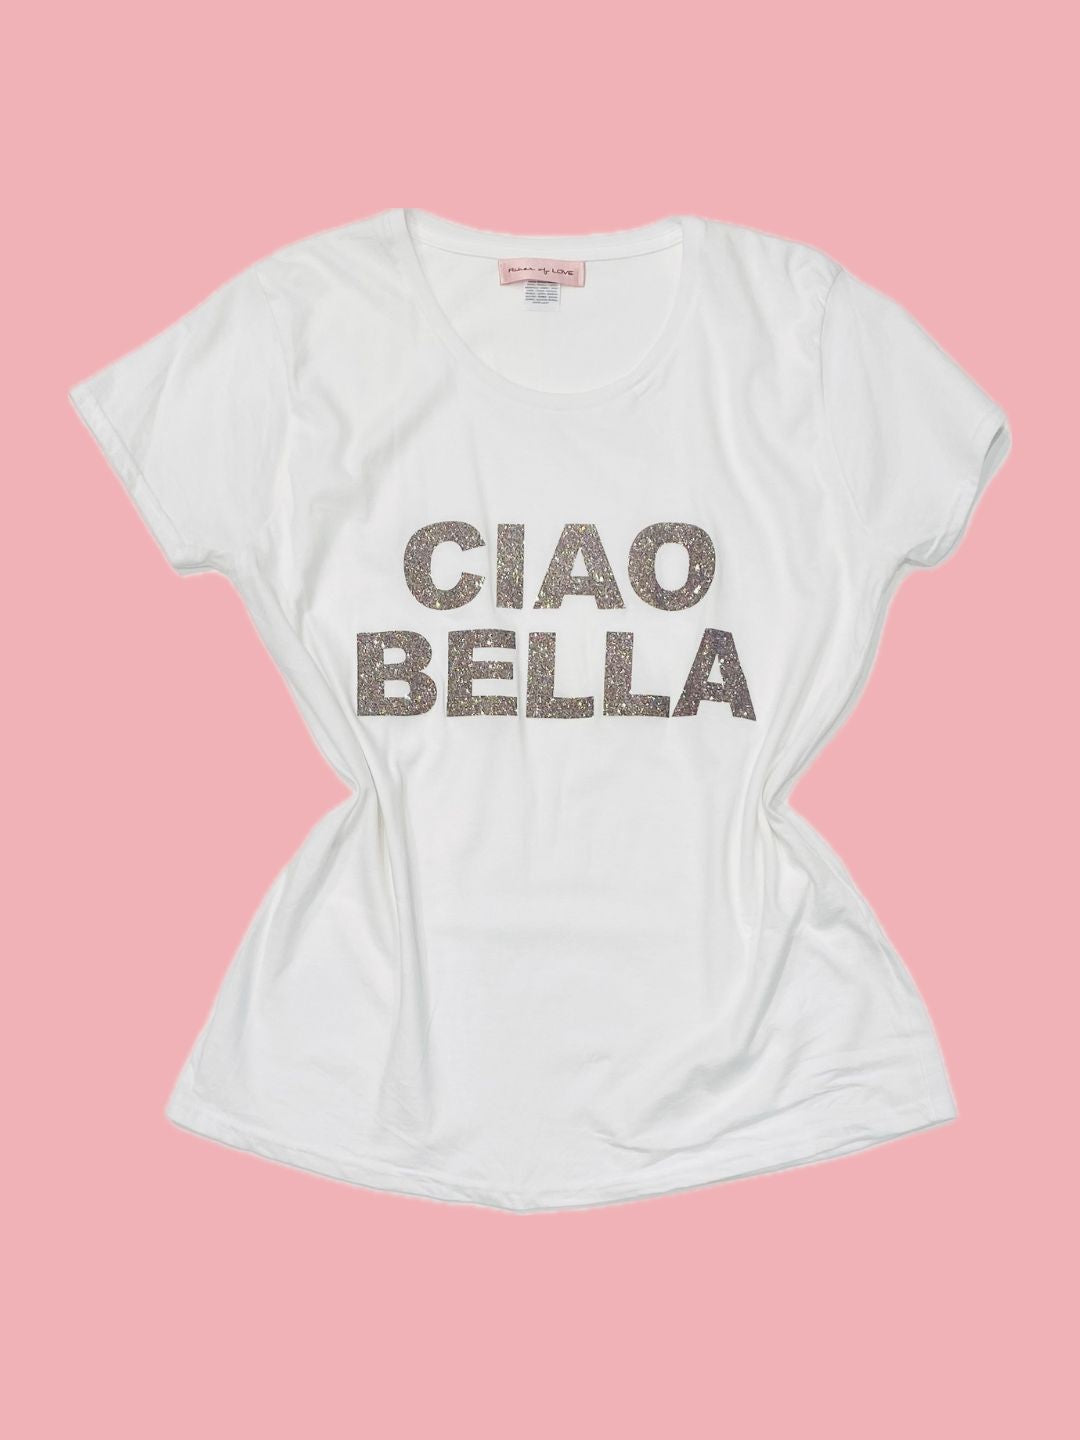 T-SHIRT CIAO BELLA Ribes of LOVE